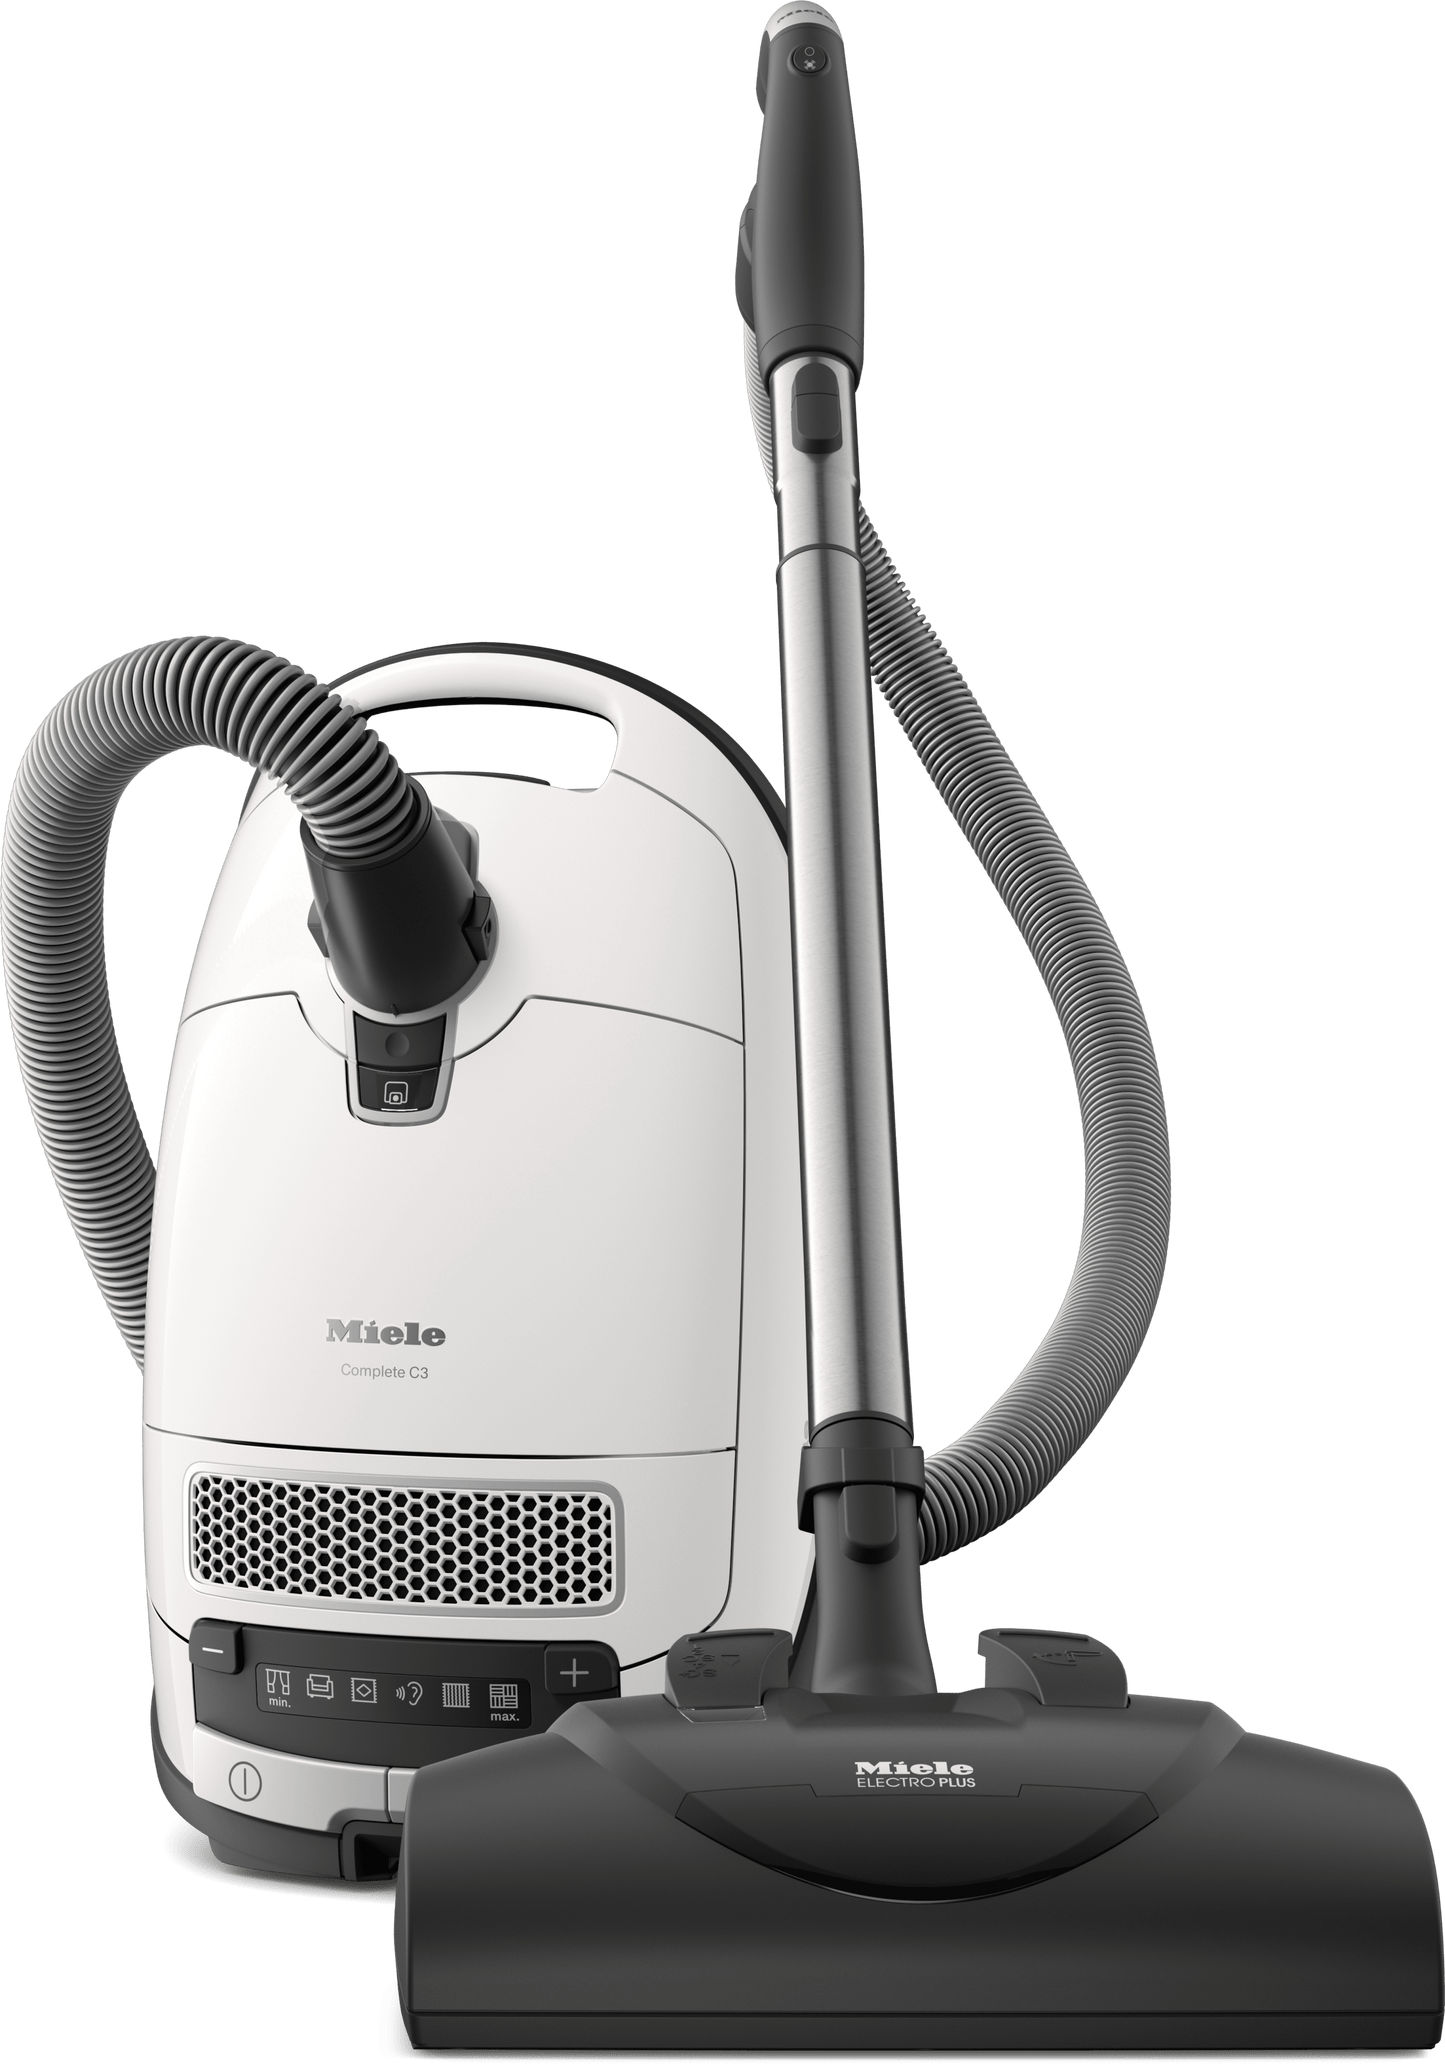 Miele COMPLETEC3CATDOGPOWERLINESGEE0LOTUSWHITE Complete C3 Cat & Dog Powerline - Sgee0 - Canister Vacuum Cleaners With Maximum Suction Power And Foot Controls For Thorough, Convenient Vacuuming.